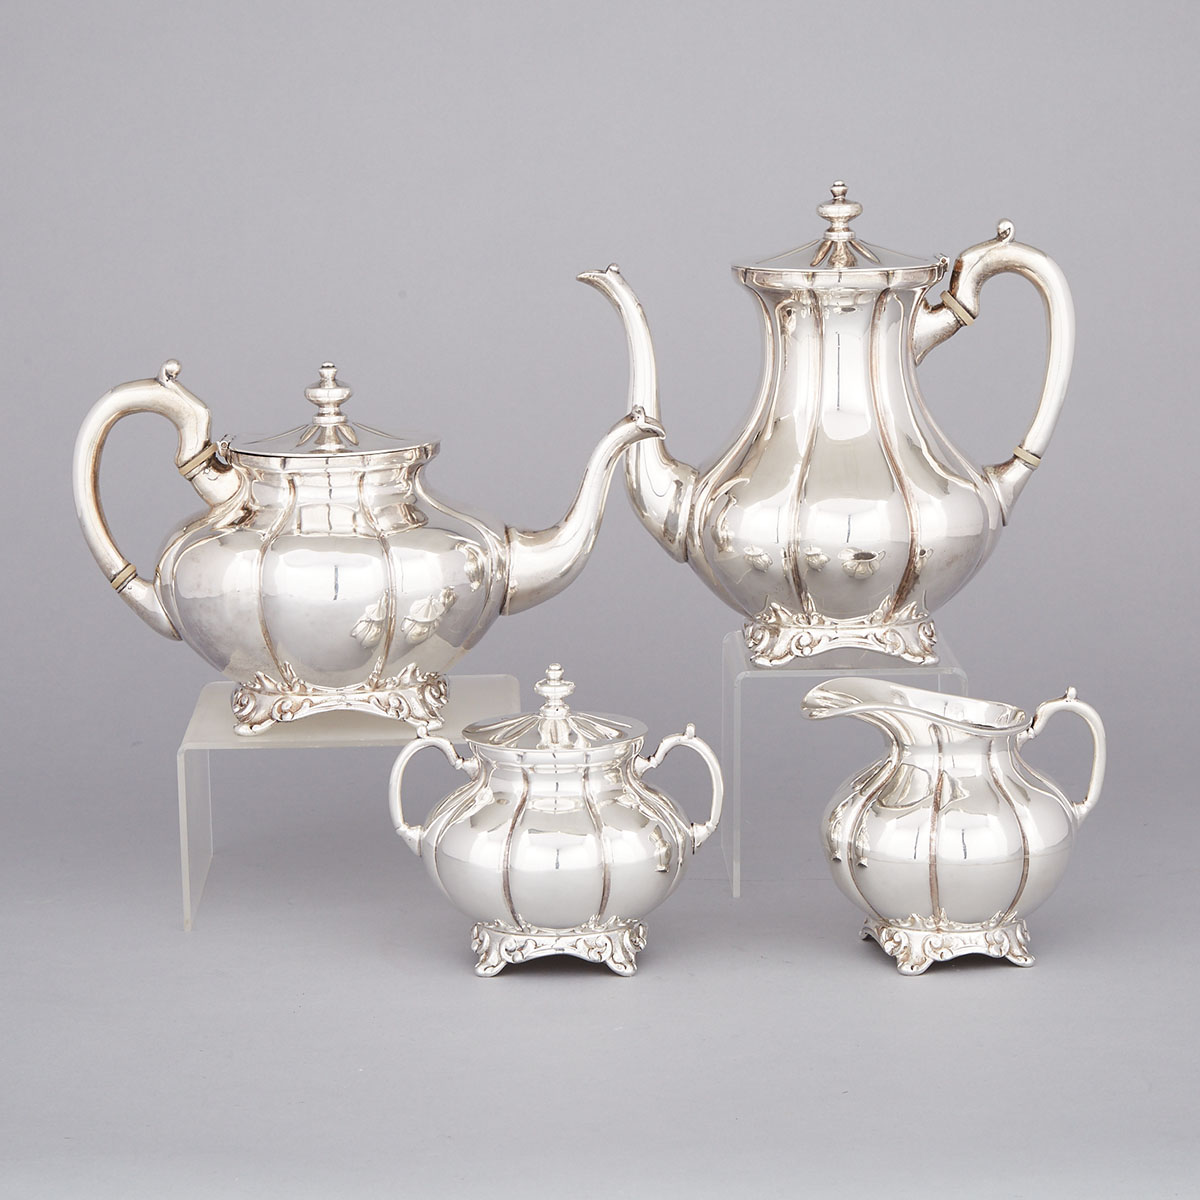 Mexican Silver Tea and Coffee Service, 20th century